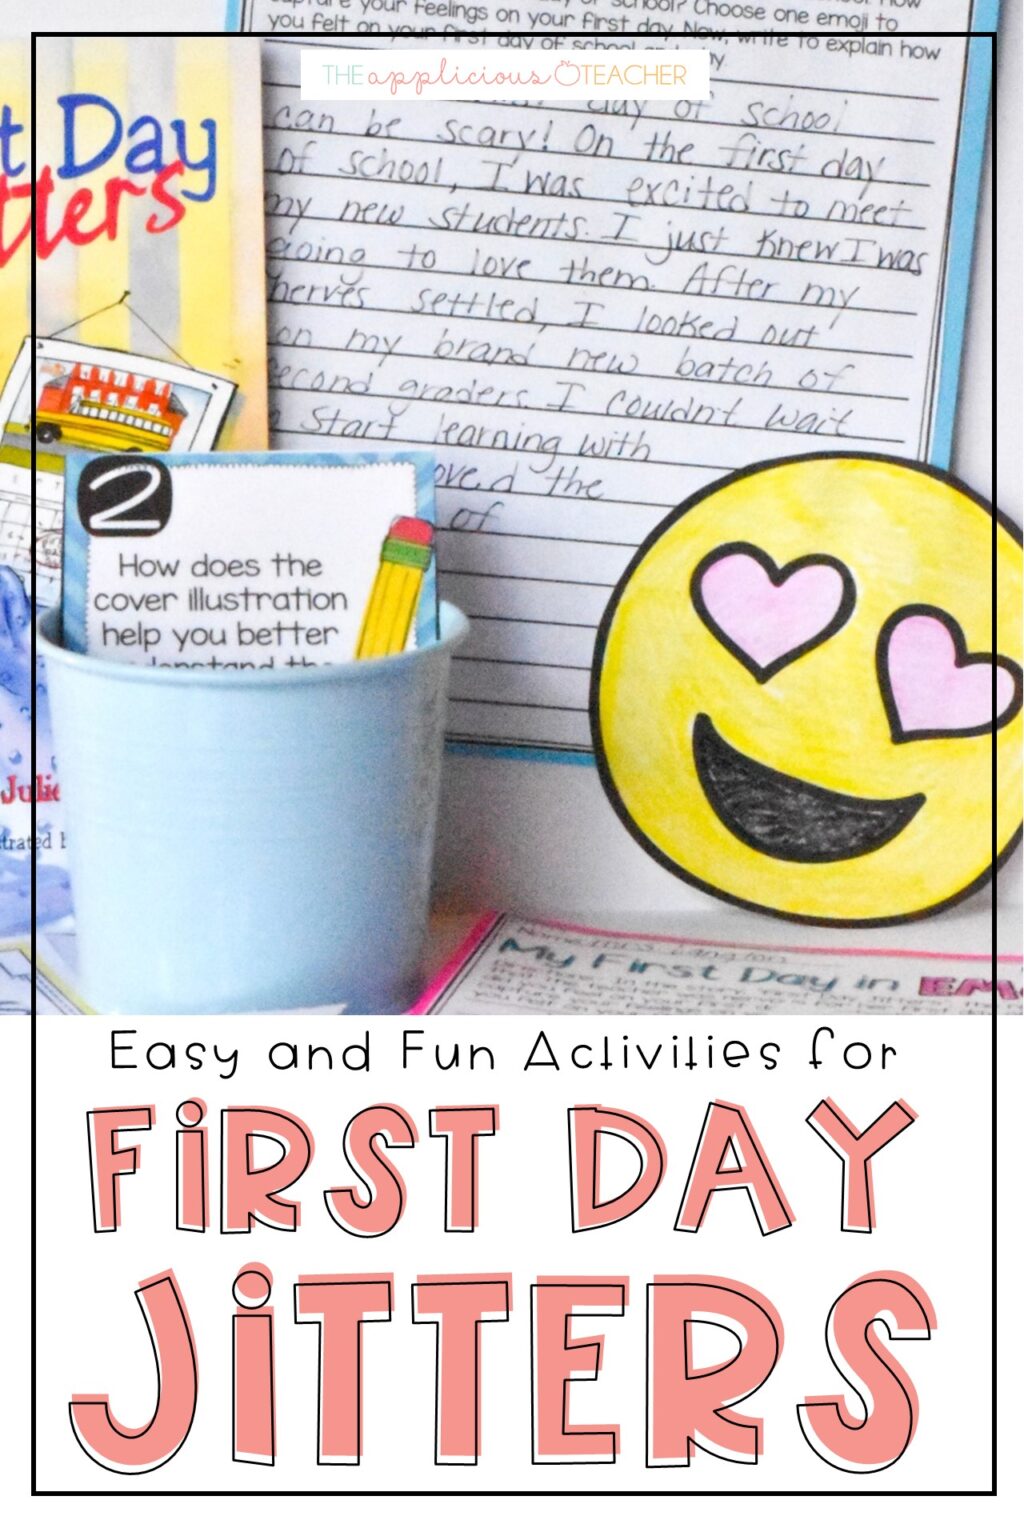 first-day-jitters-activities-2-the-applicious-teacher